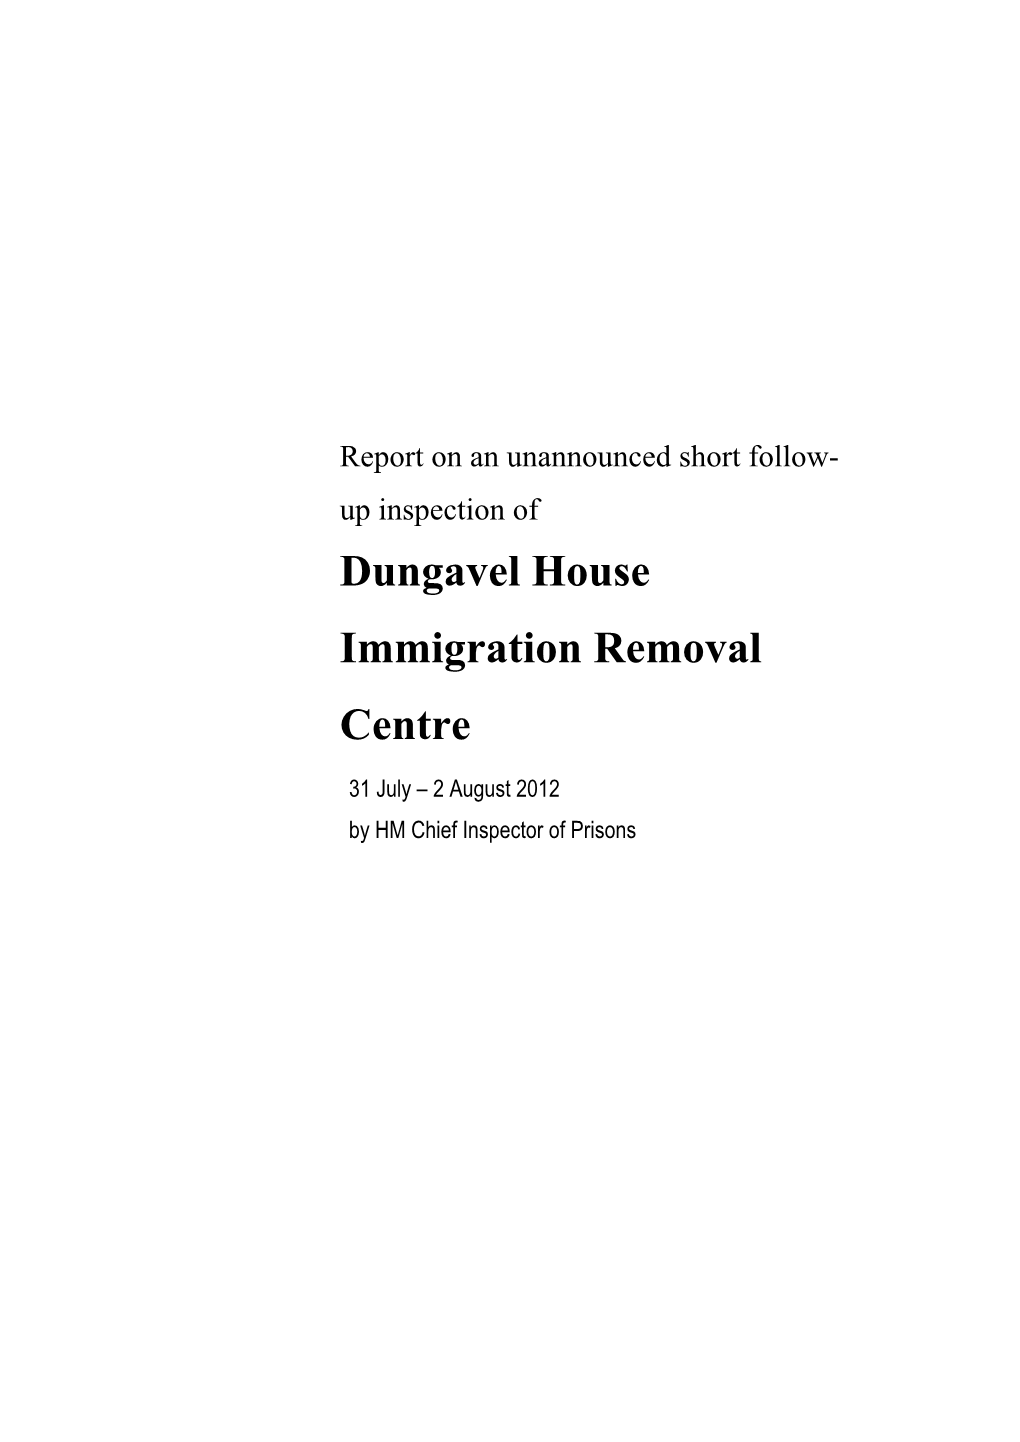 Dungavel House Immigration Removal Centre 2012